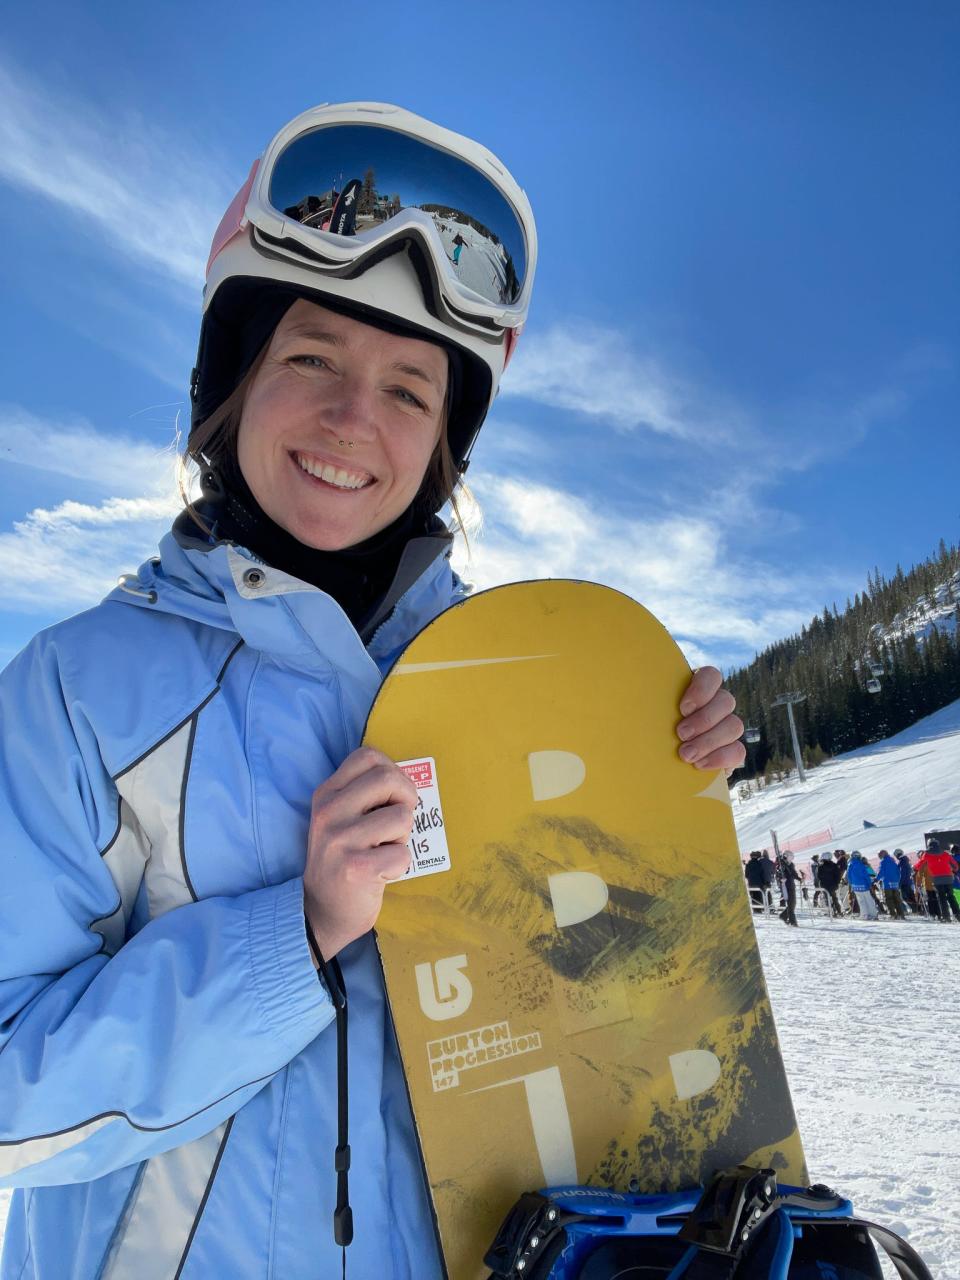 The author holds a rented snowboard in Winter Park, Colorado.